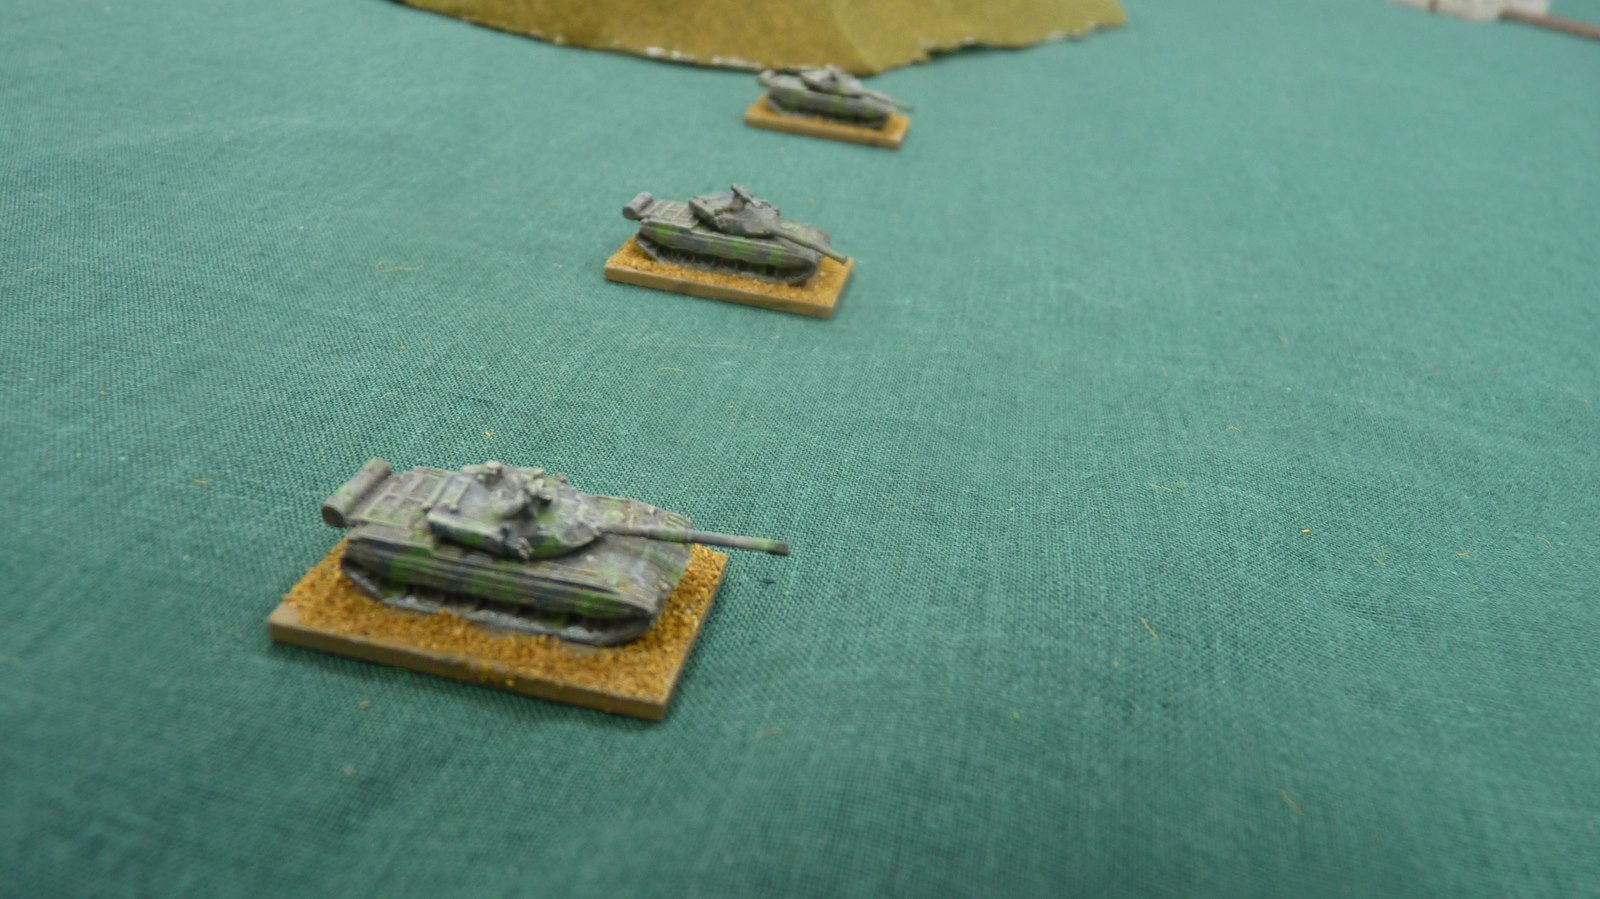 Chinese tanks enter the table and advance close to the steep hill